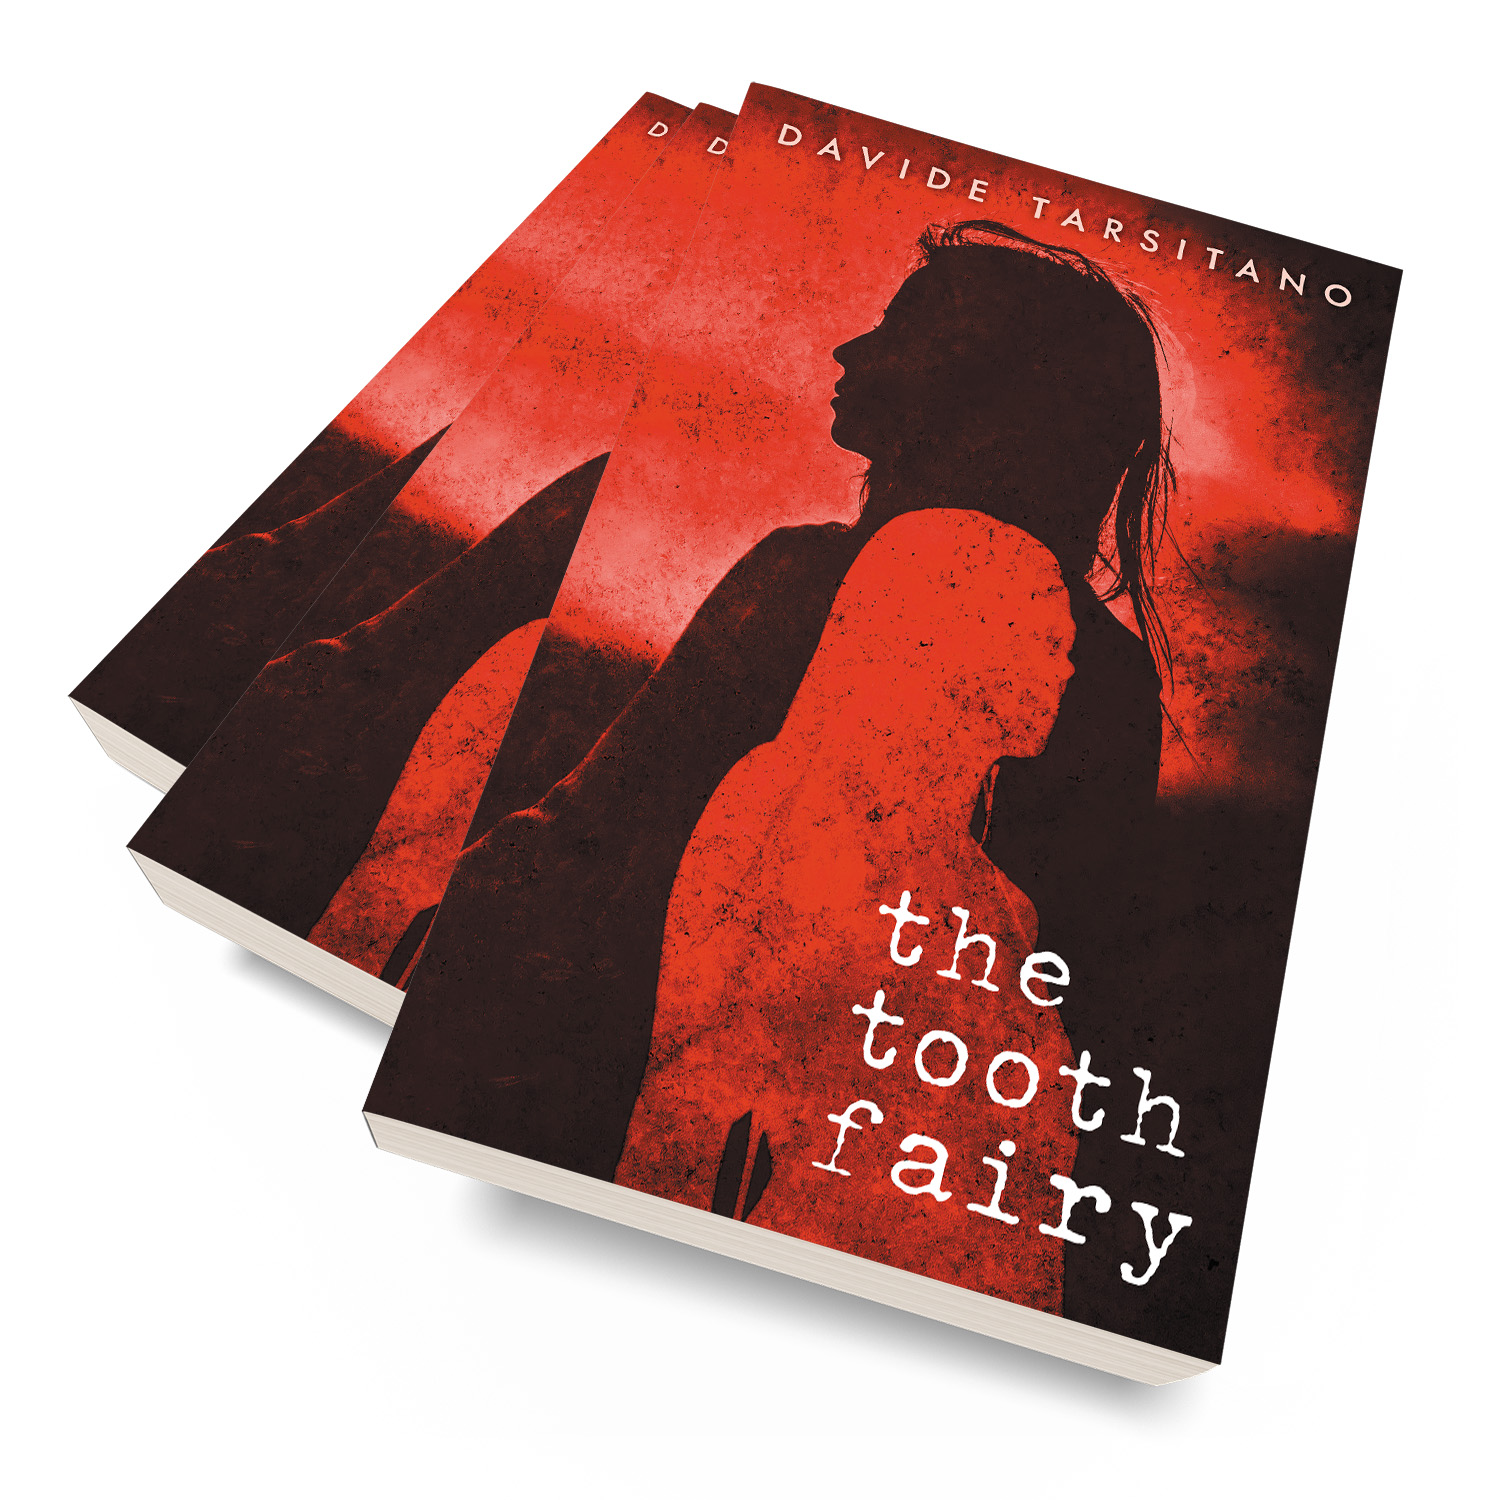 'The Tooth Fairy' is a chilling character-based horror novel. The author is Davide Tarsitano. The book cover and interior formatting are designed by Mark Thomas of coverness.com. To find out more about my book design services, please visit www.coverness.com